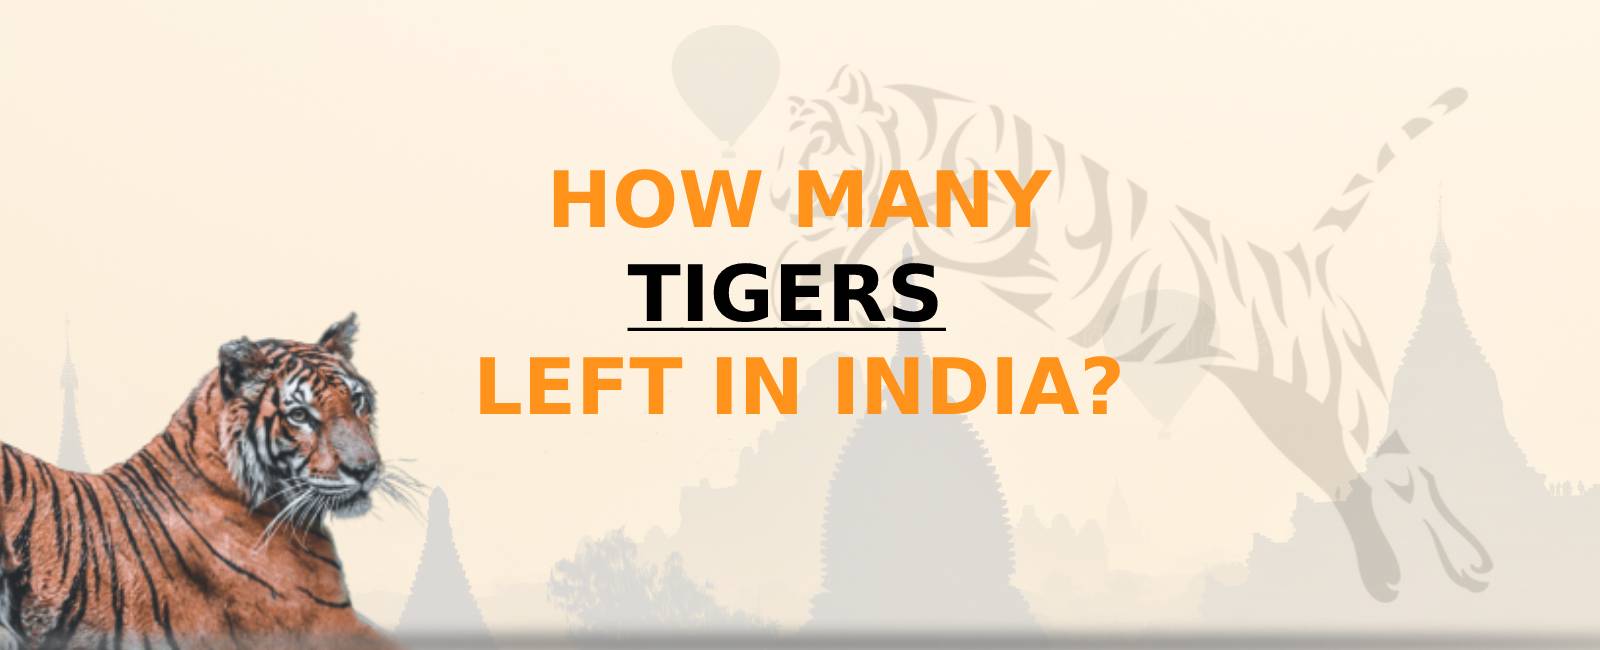 How Many Tigers Left in India?